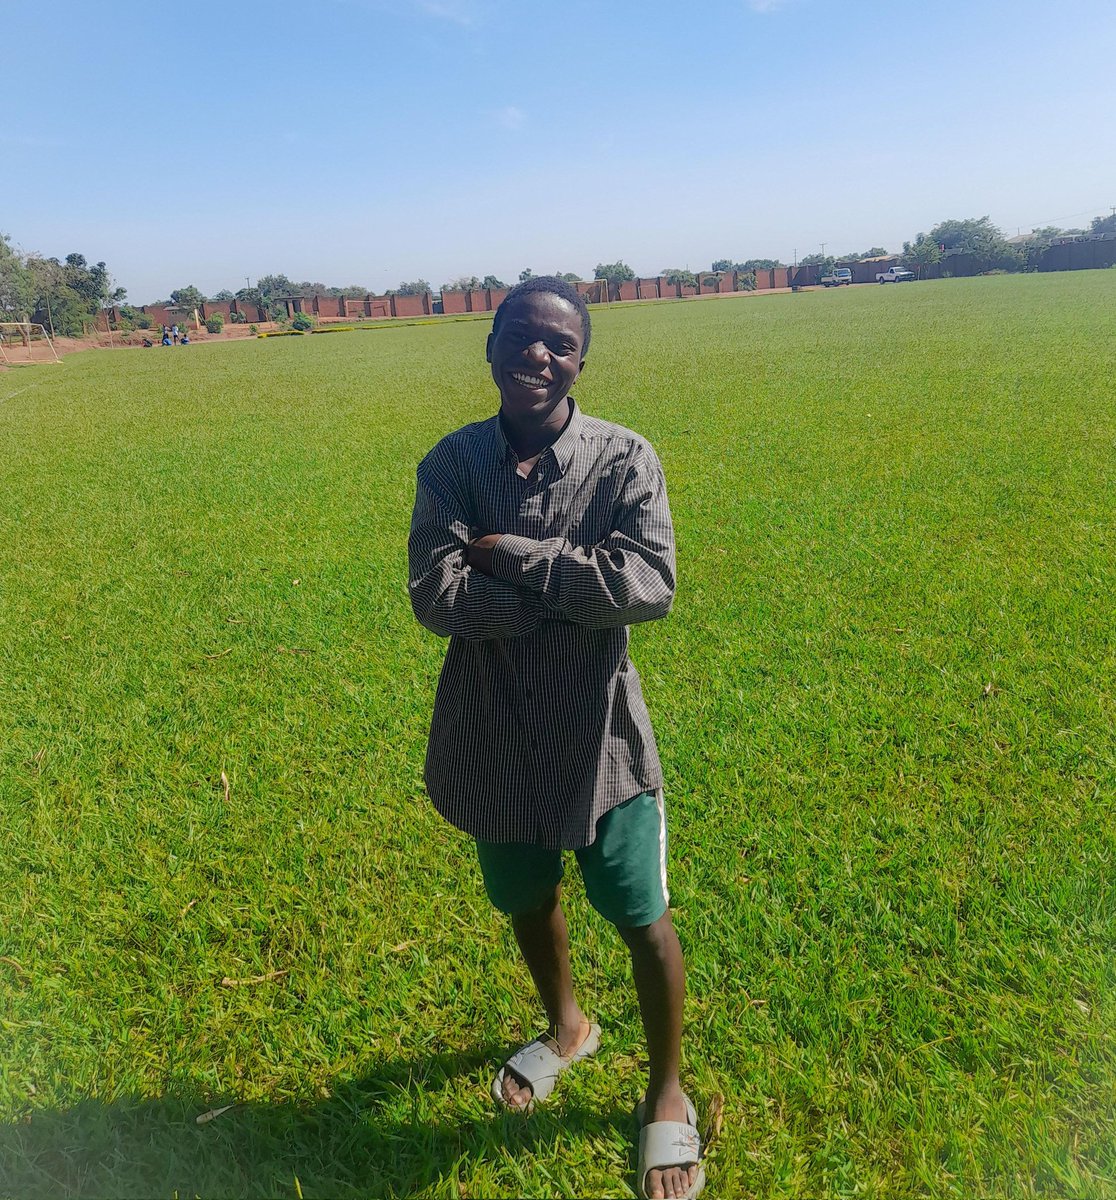 Celebrating our first donation from my X followers with a big smile. Thanks to @JivaPatrick for contributing K5000 to the Kuthandiza Mudzi Project. Be the second in line and change a life. #lenifootballacademy